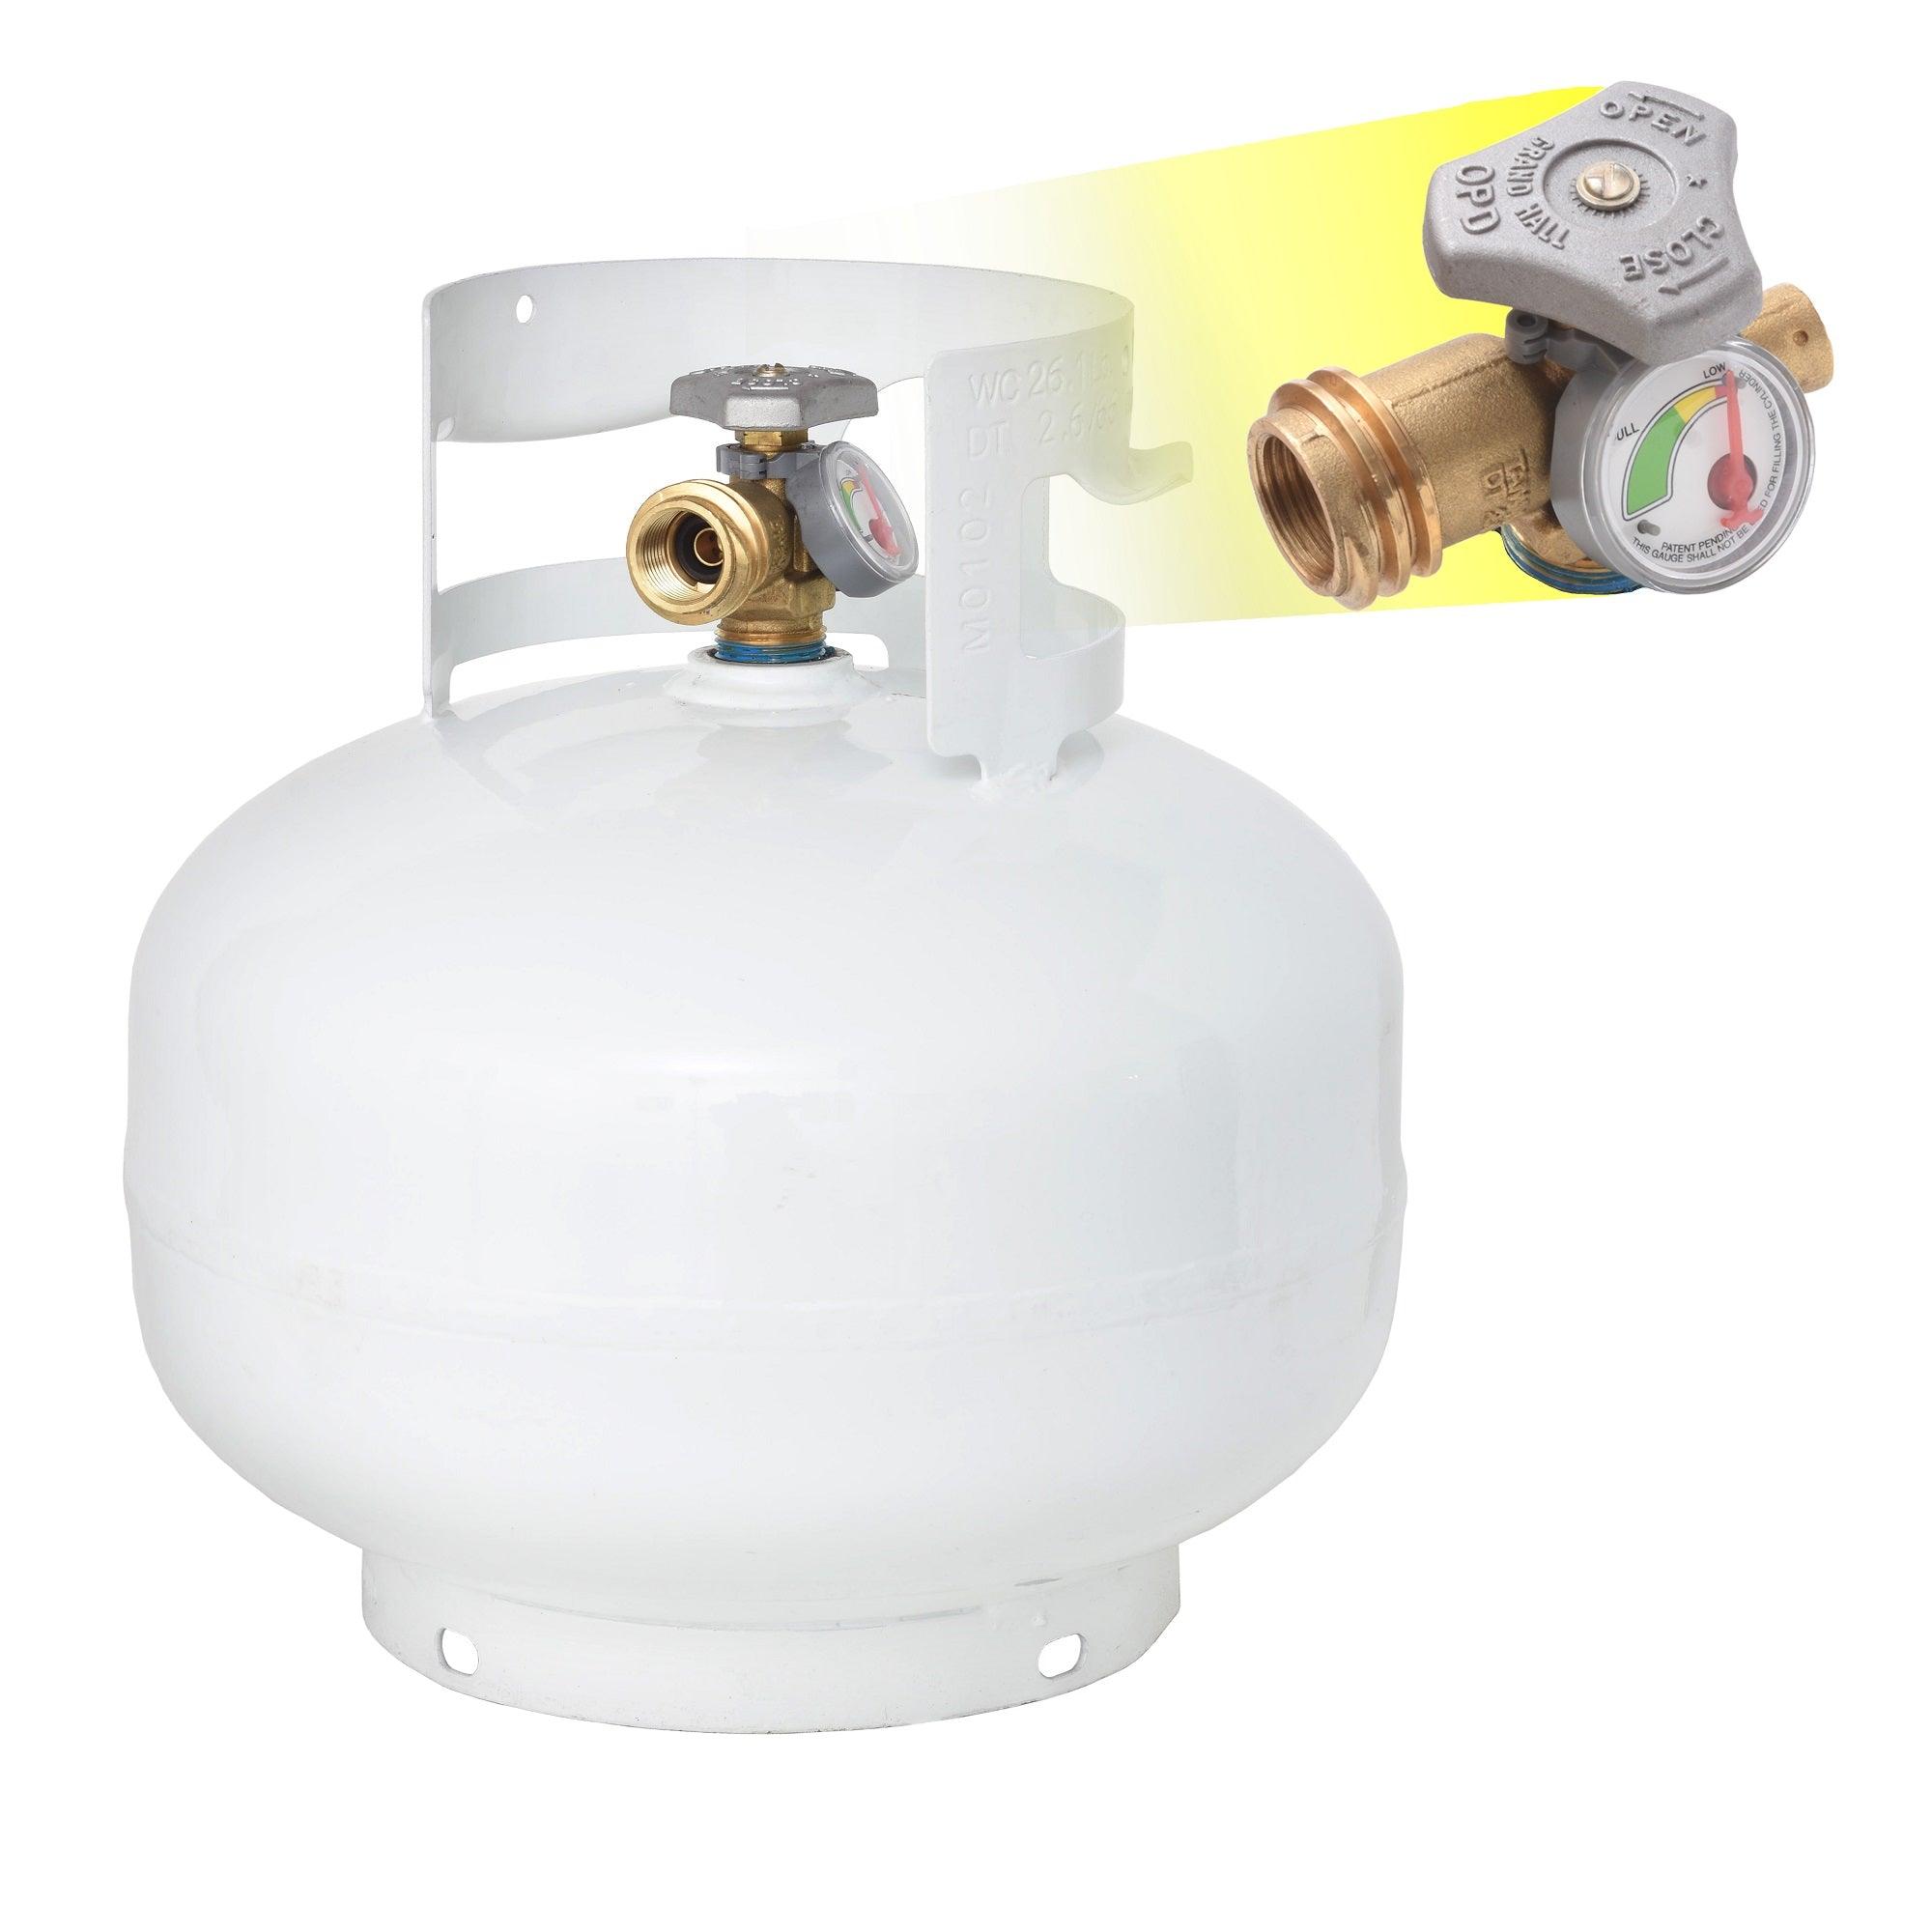 Flame King 11 Pound Propane Tank Cylinder Squatty with Type 1 OPD Valve - Flame King